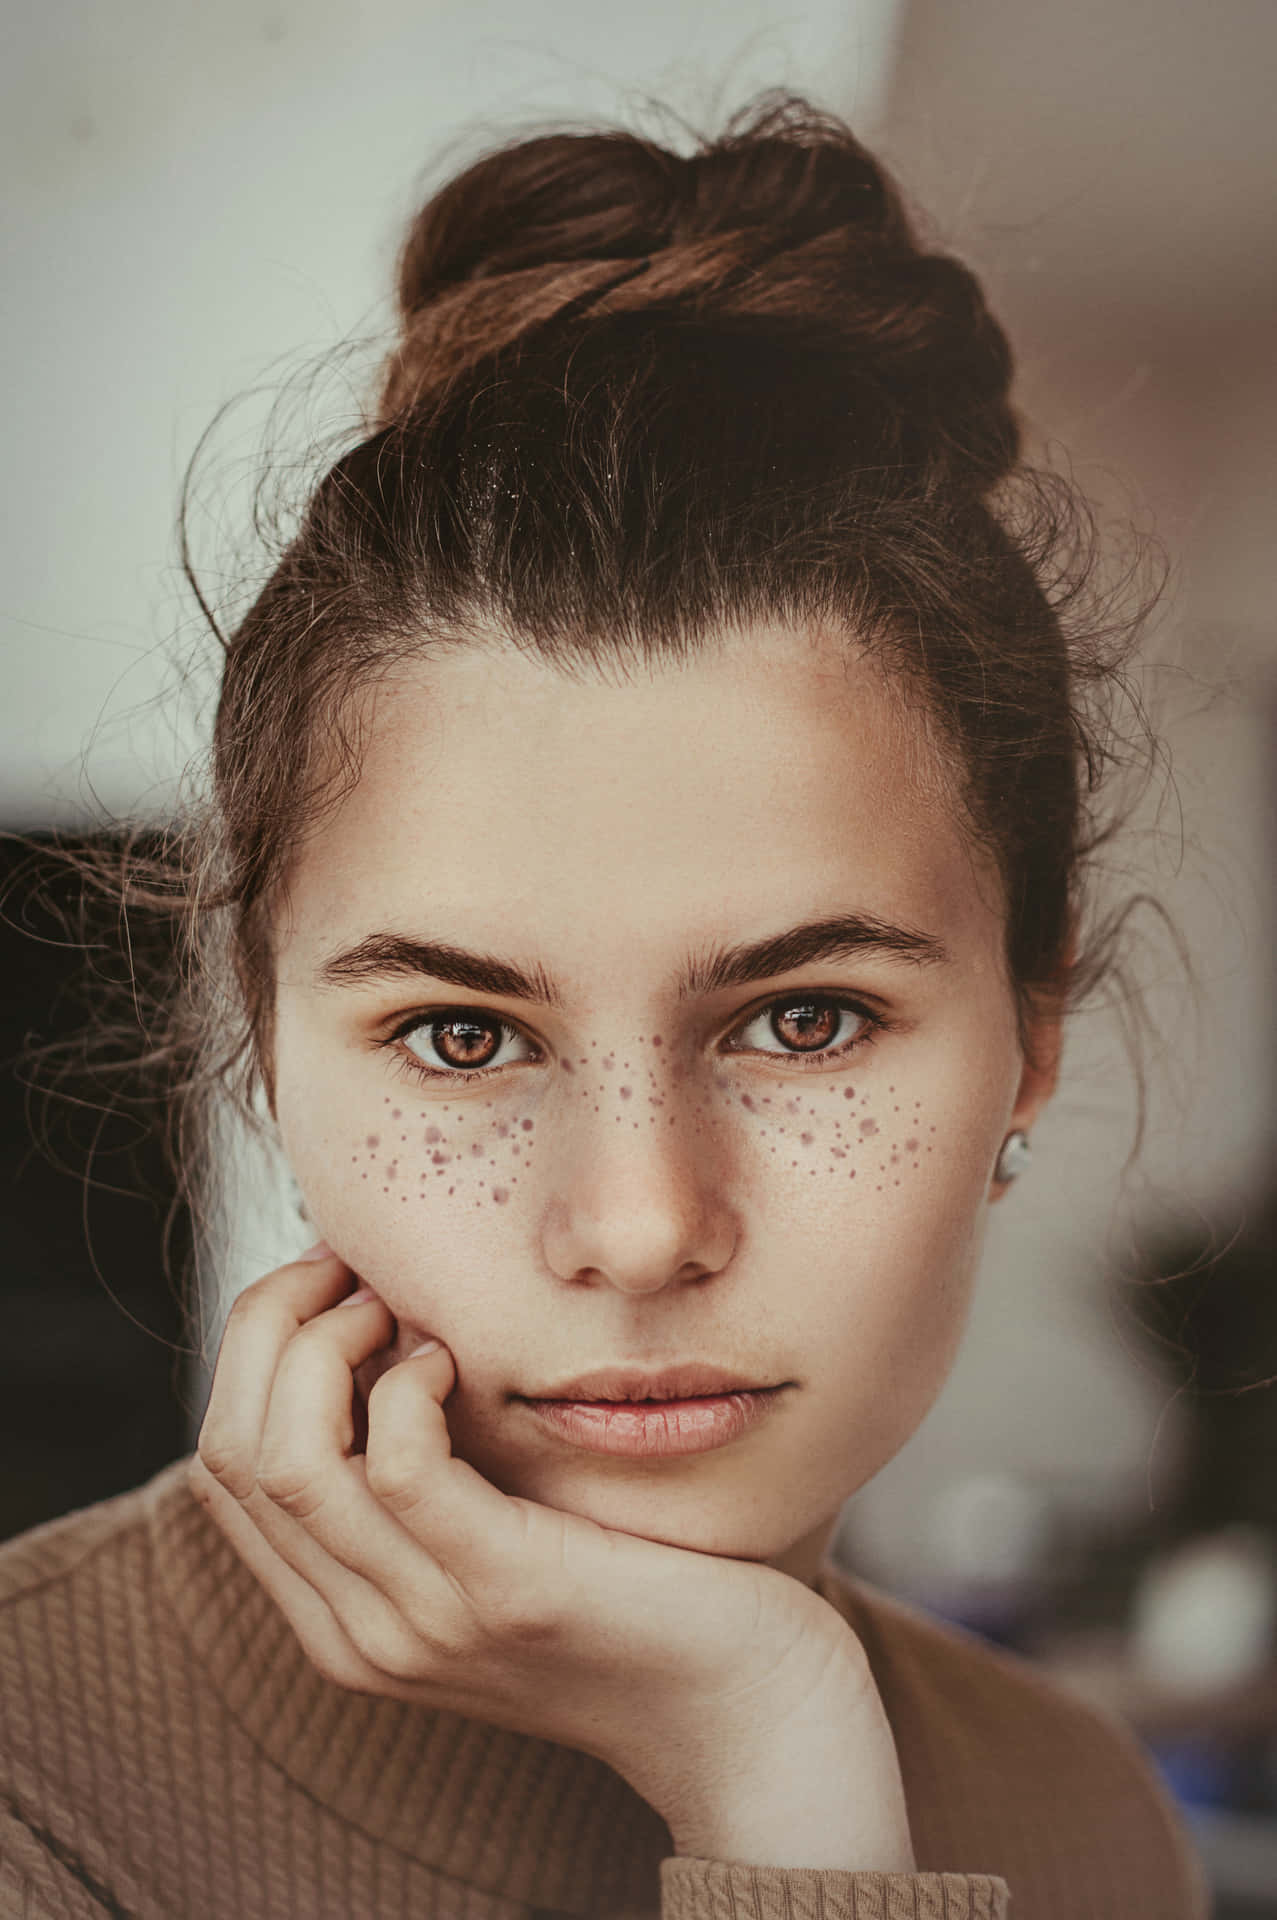 Portrait Picture Girl With Freckles